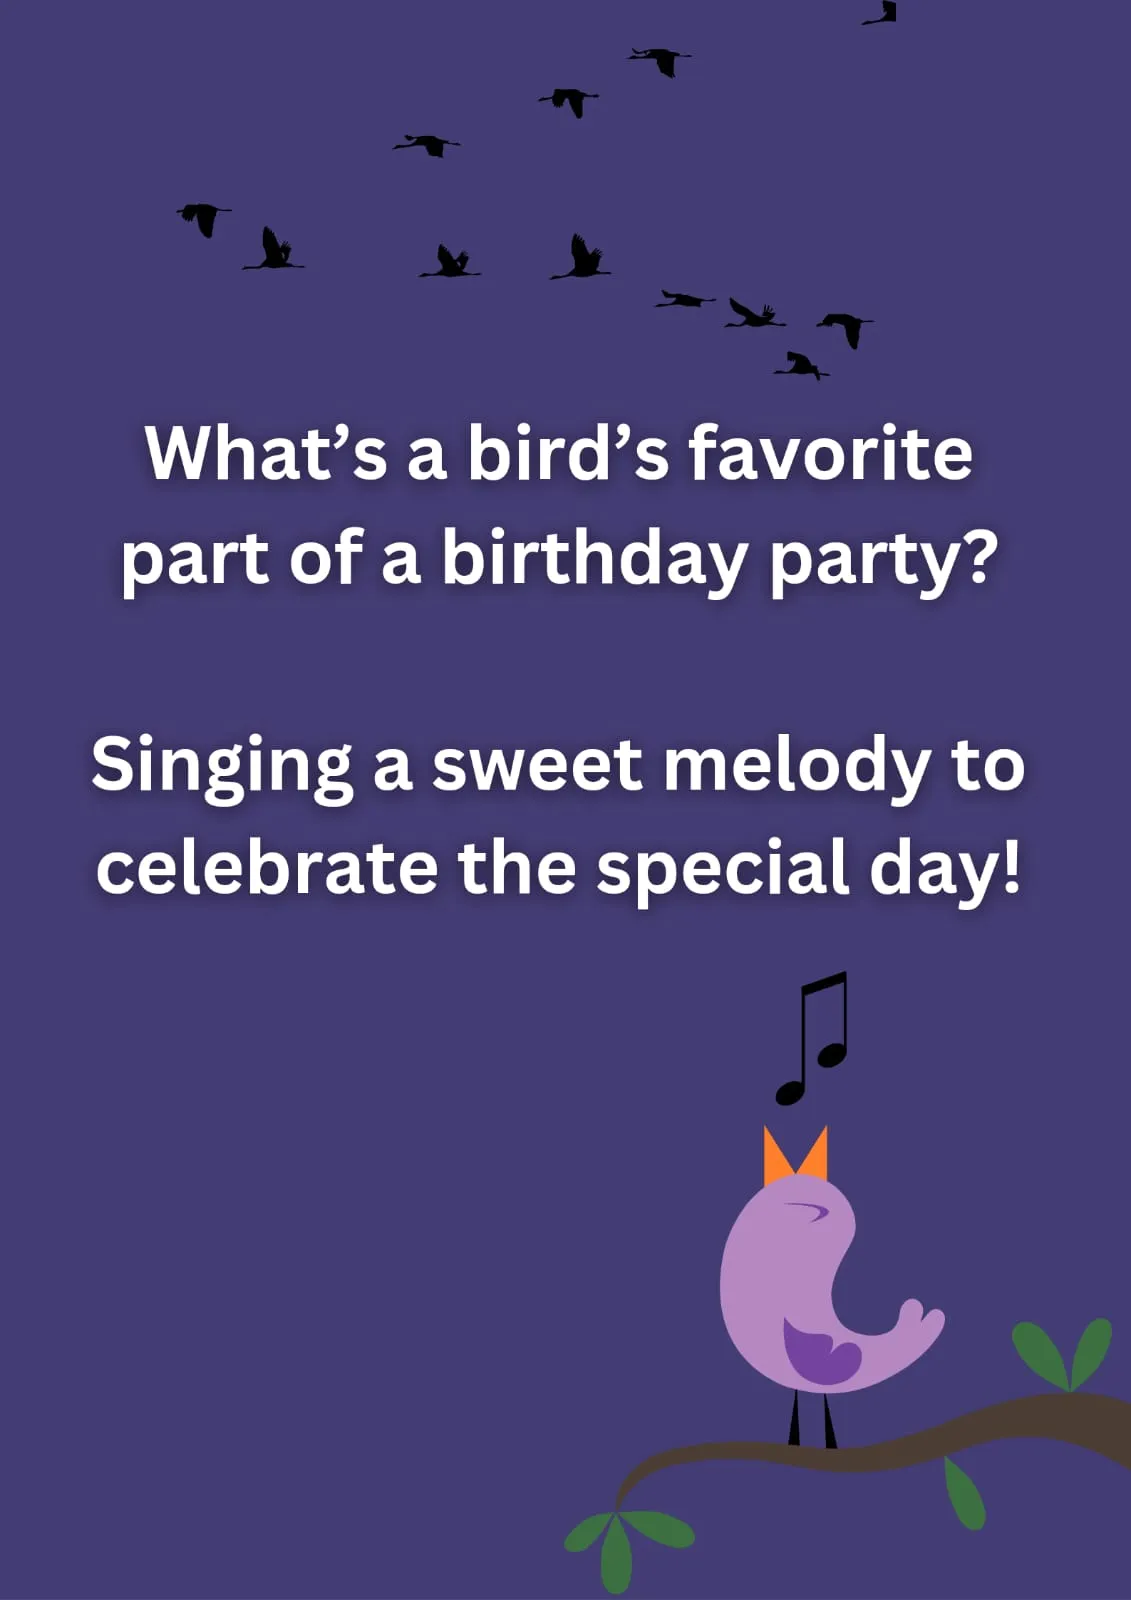 What's a bird's favorite part of a birthday party? Birthday Jokes by statusjin